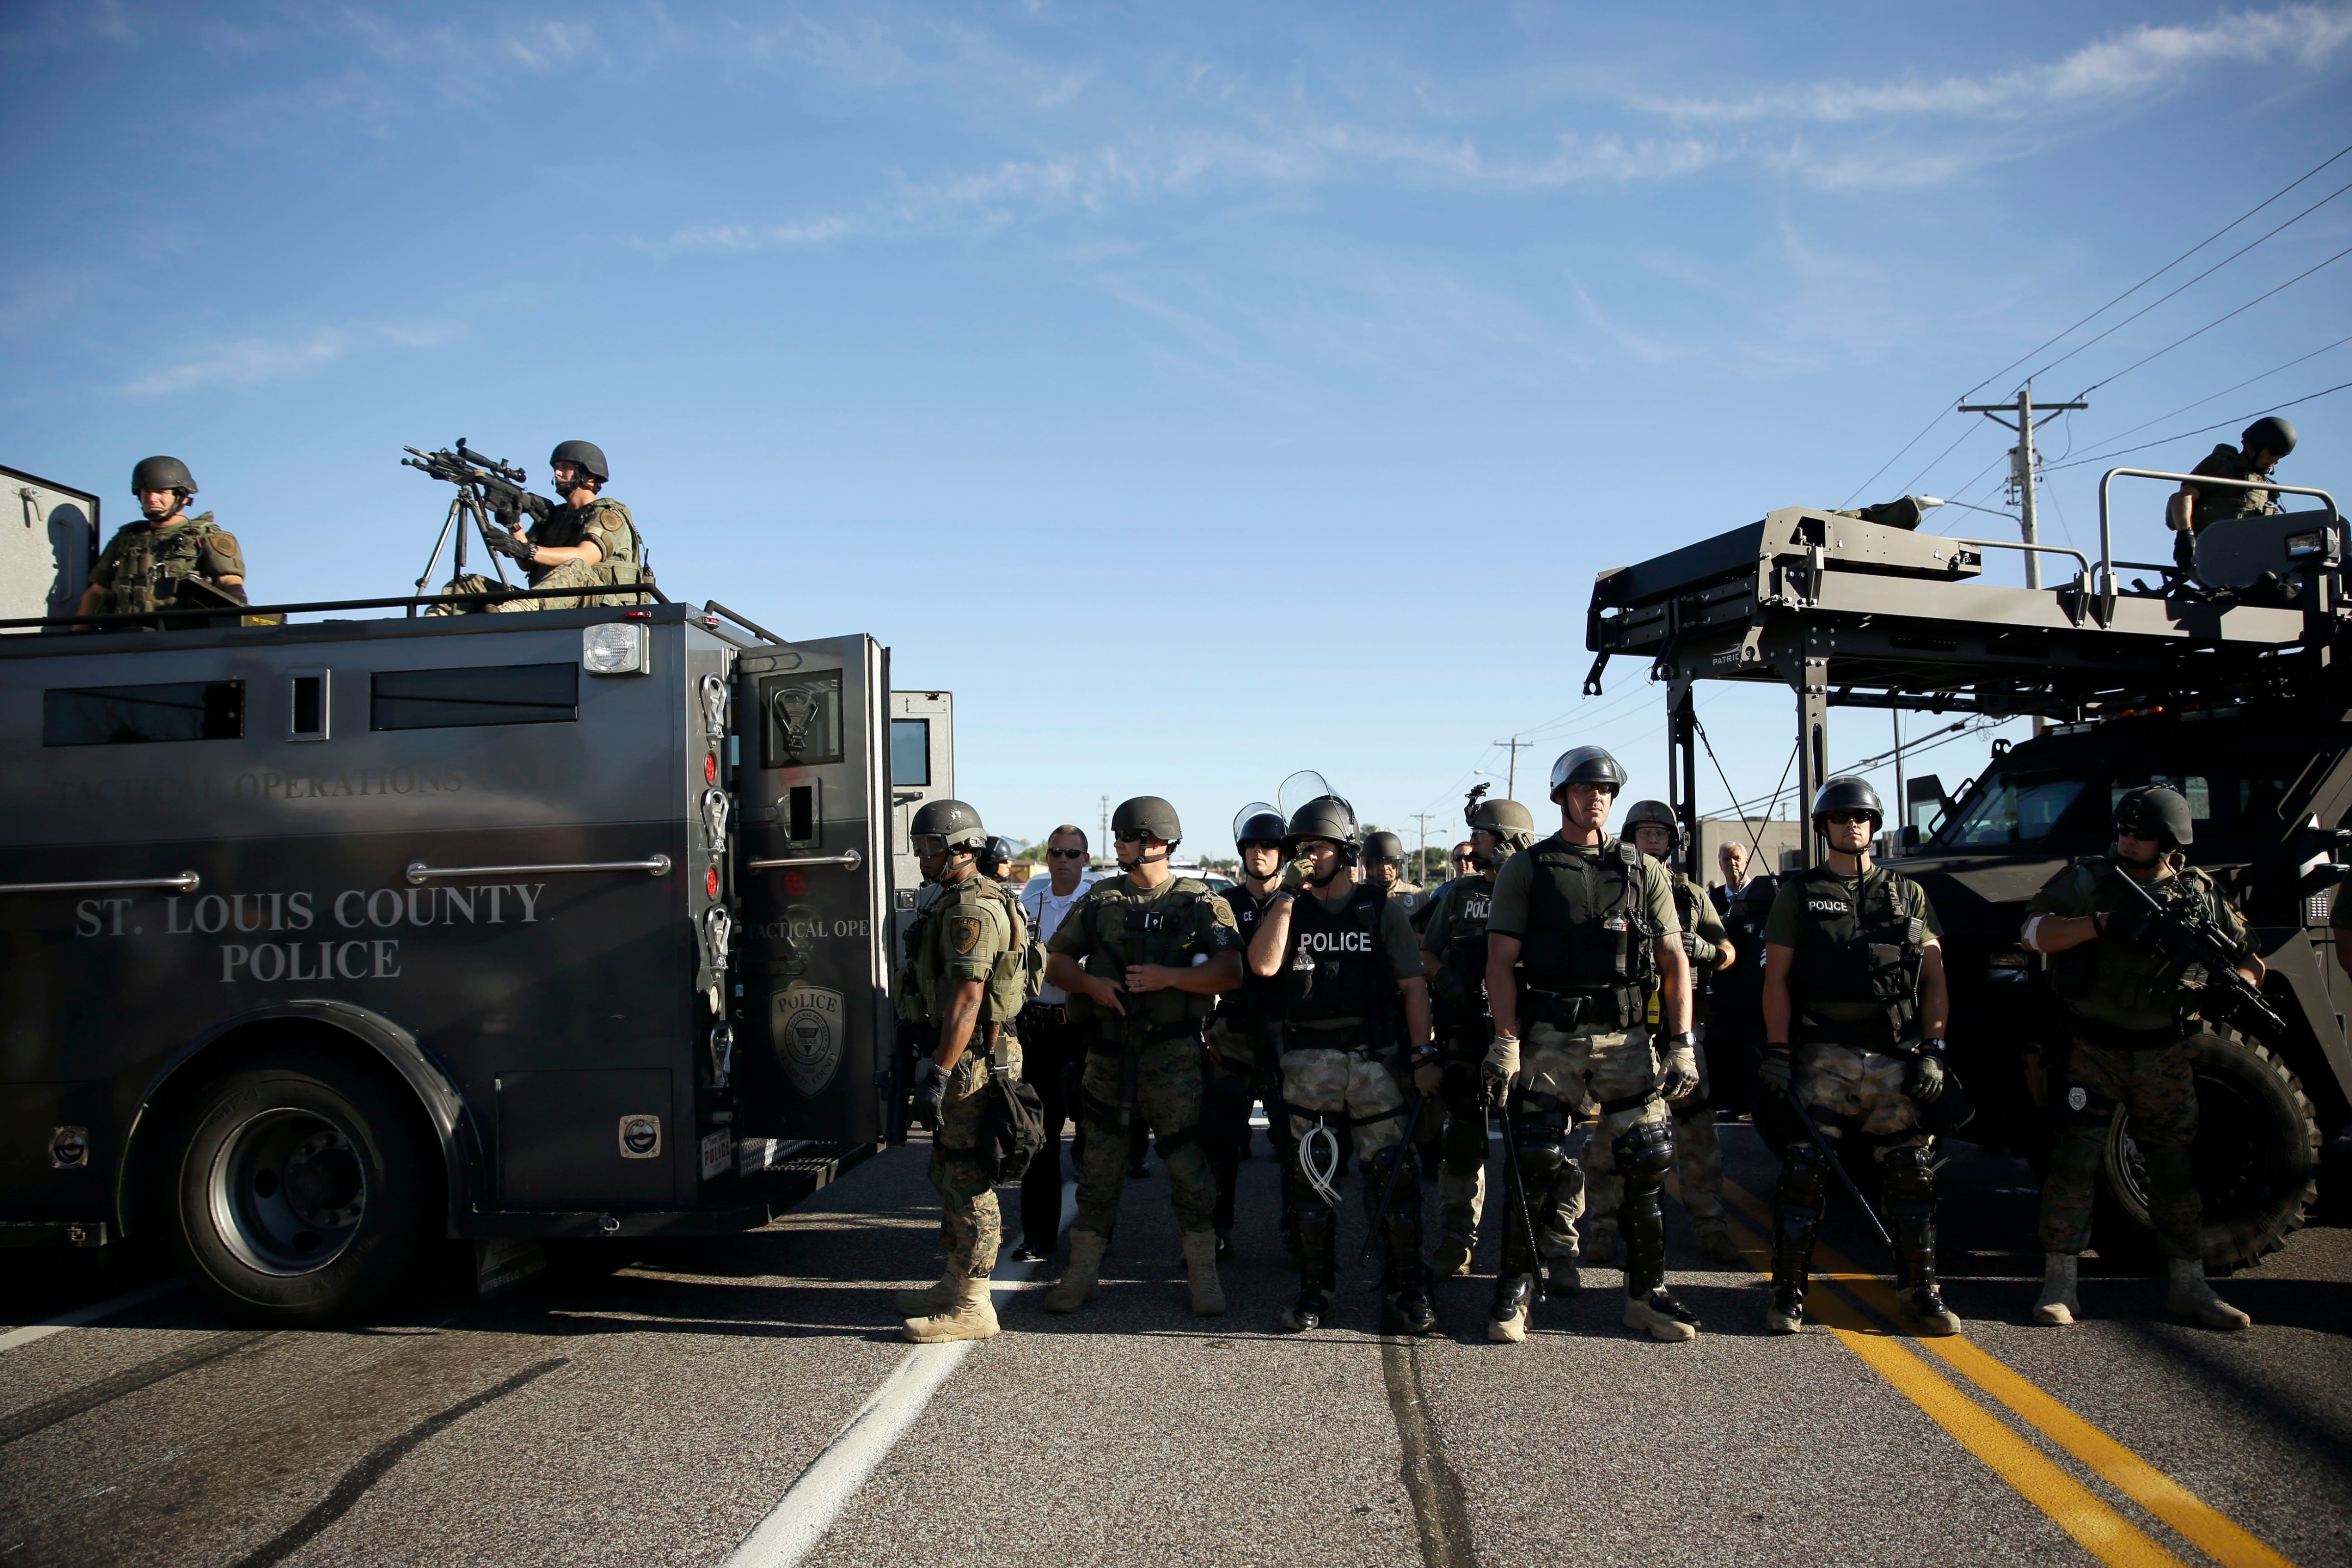 Police in riot gear watch protesters in Ferguson, Mo. on Aug. 13, 2014. (Jeff Roberson—AP)